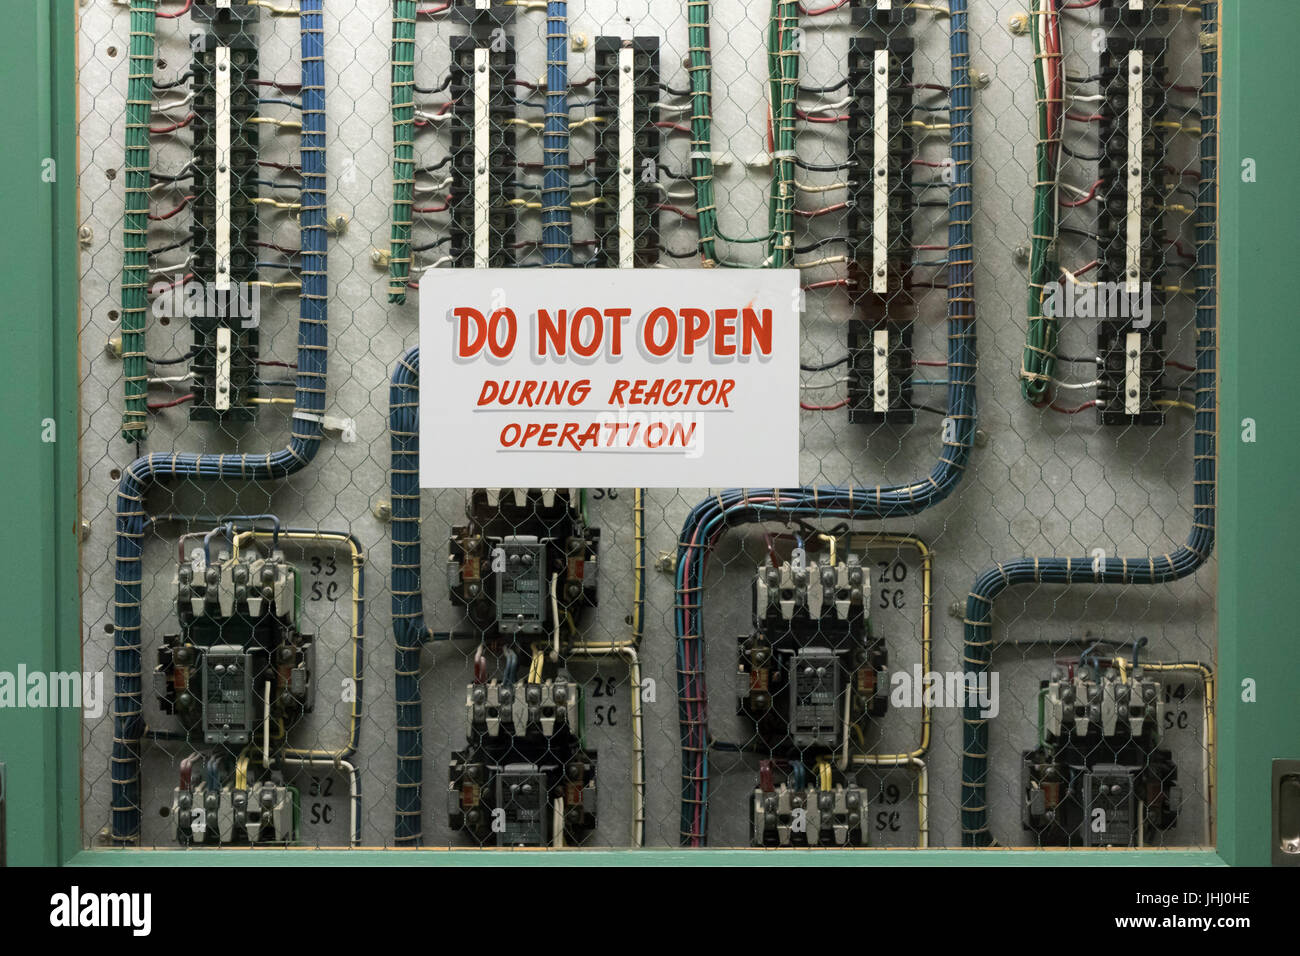 sign: do not open during reactor operation, electric power distribution panels, The B Reactor Hanford, near Richland, Washington Stock Photo